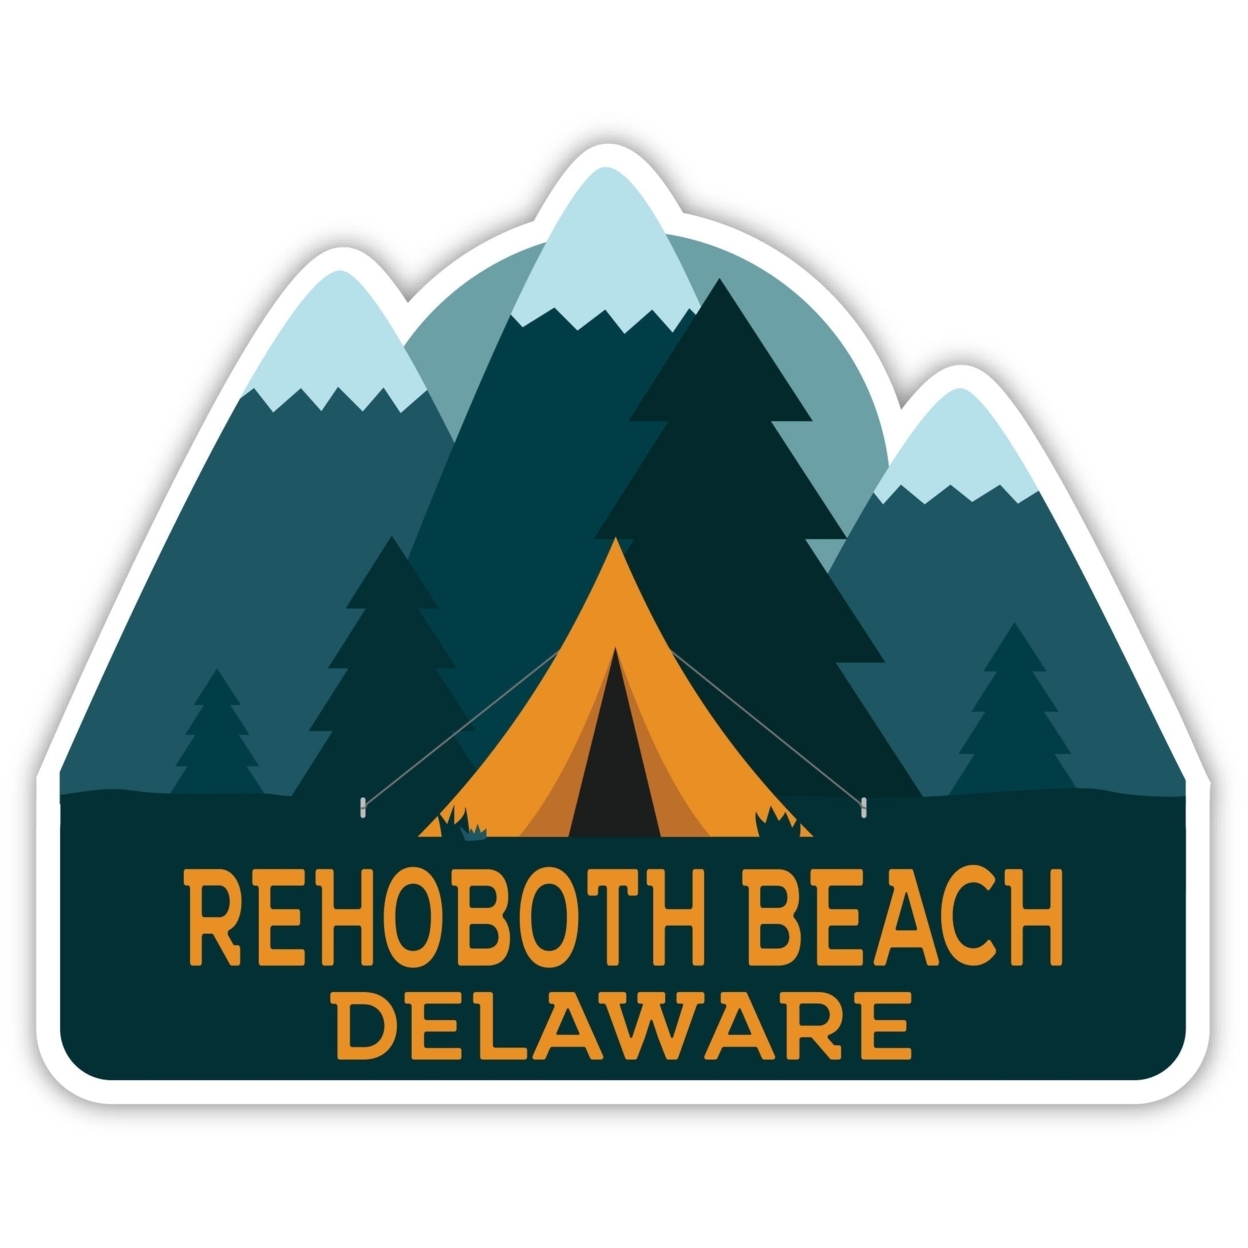 Rehoboth Beach Delaware Souvenir Decorative Stickers (Choose Theme And Size) - Single Unit, 4-Inch, Tent